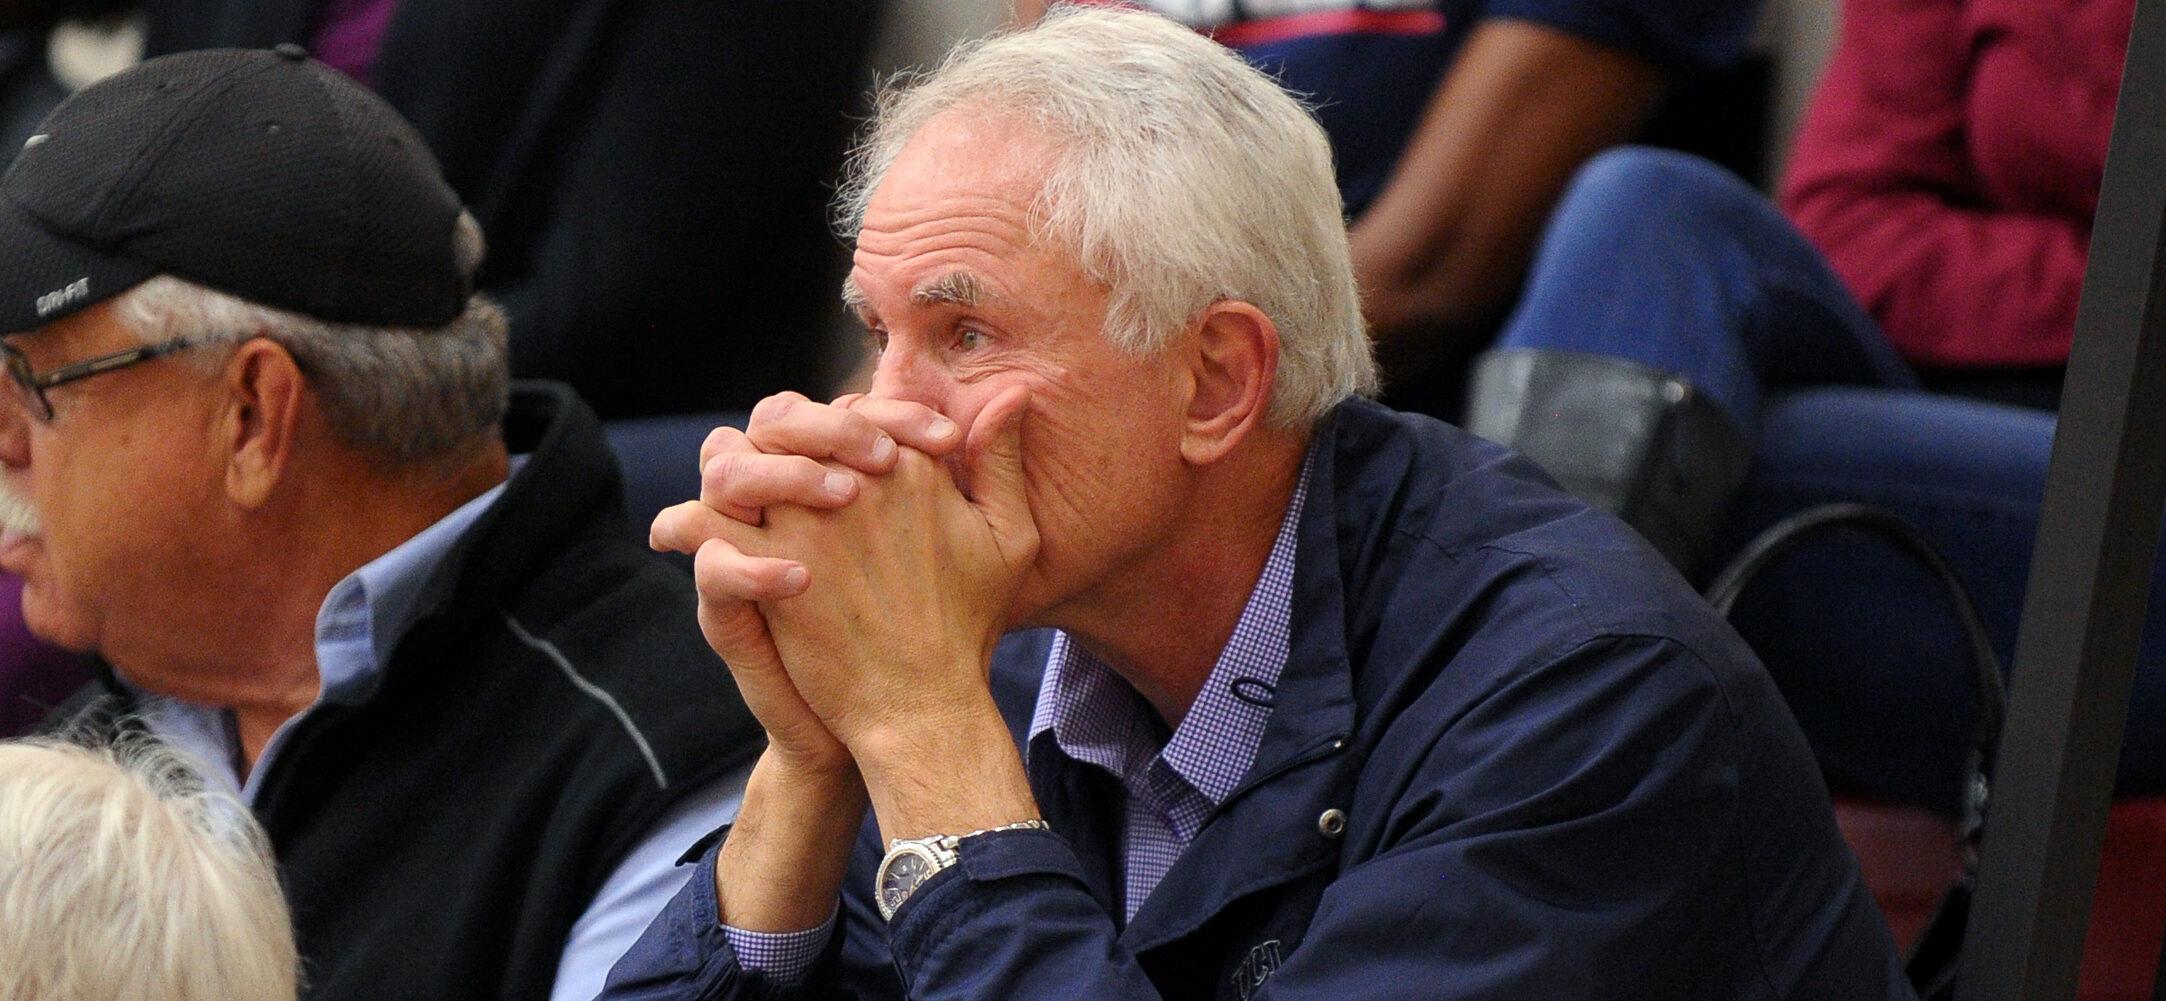 NBA's Mitch Kupchak's Wife Files For Divorce After 30 Years of Marriage, Demands Spousal Support